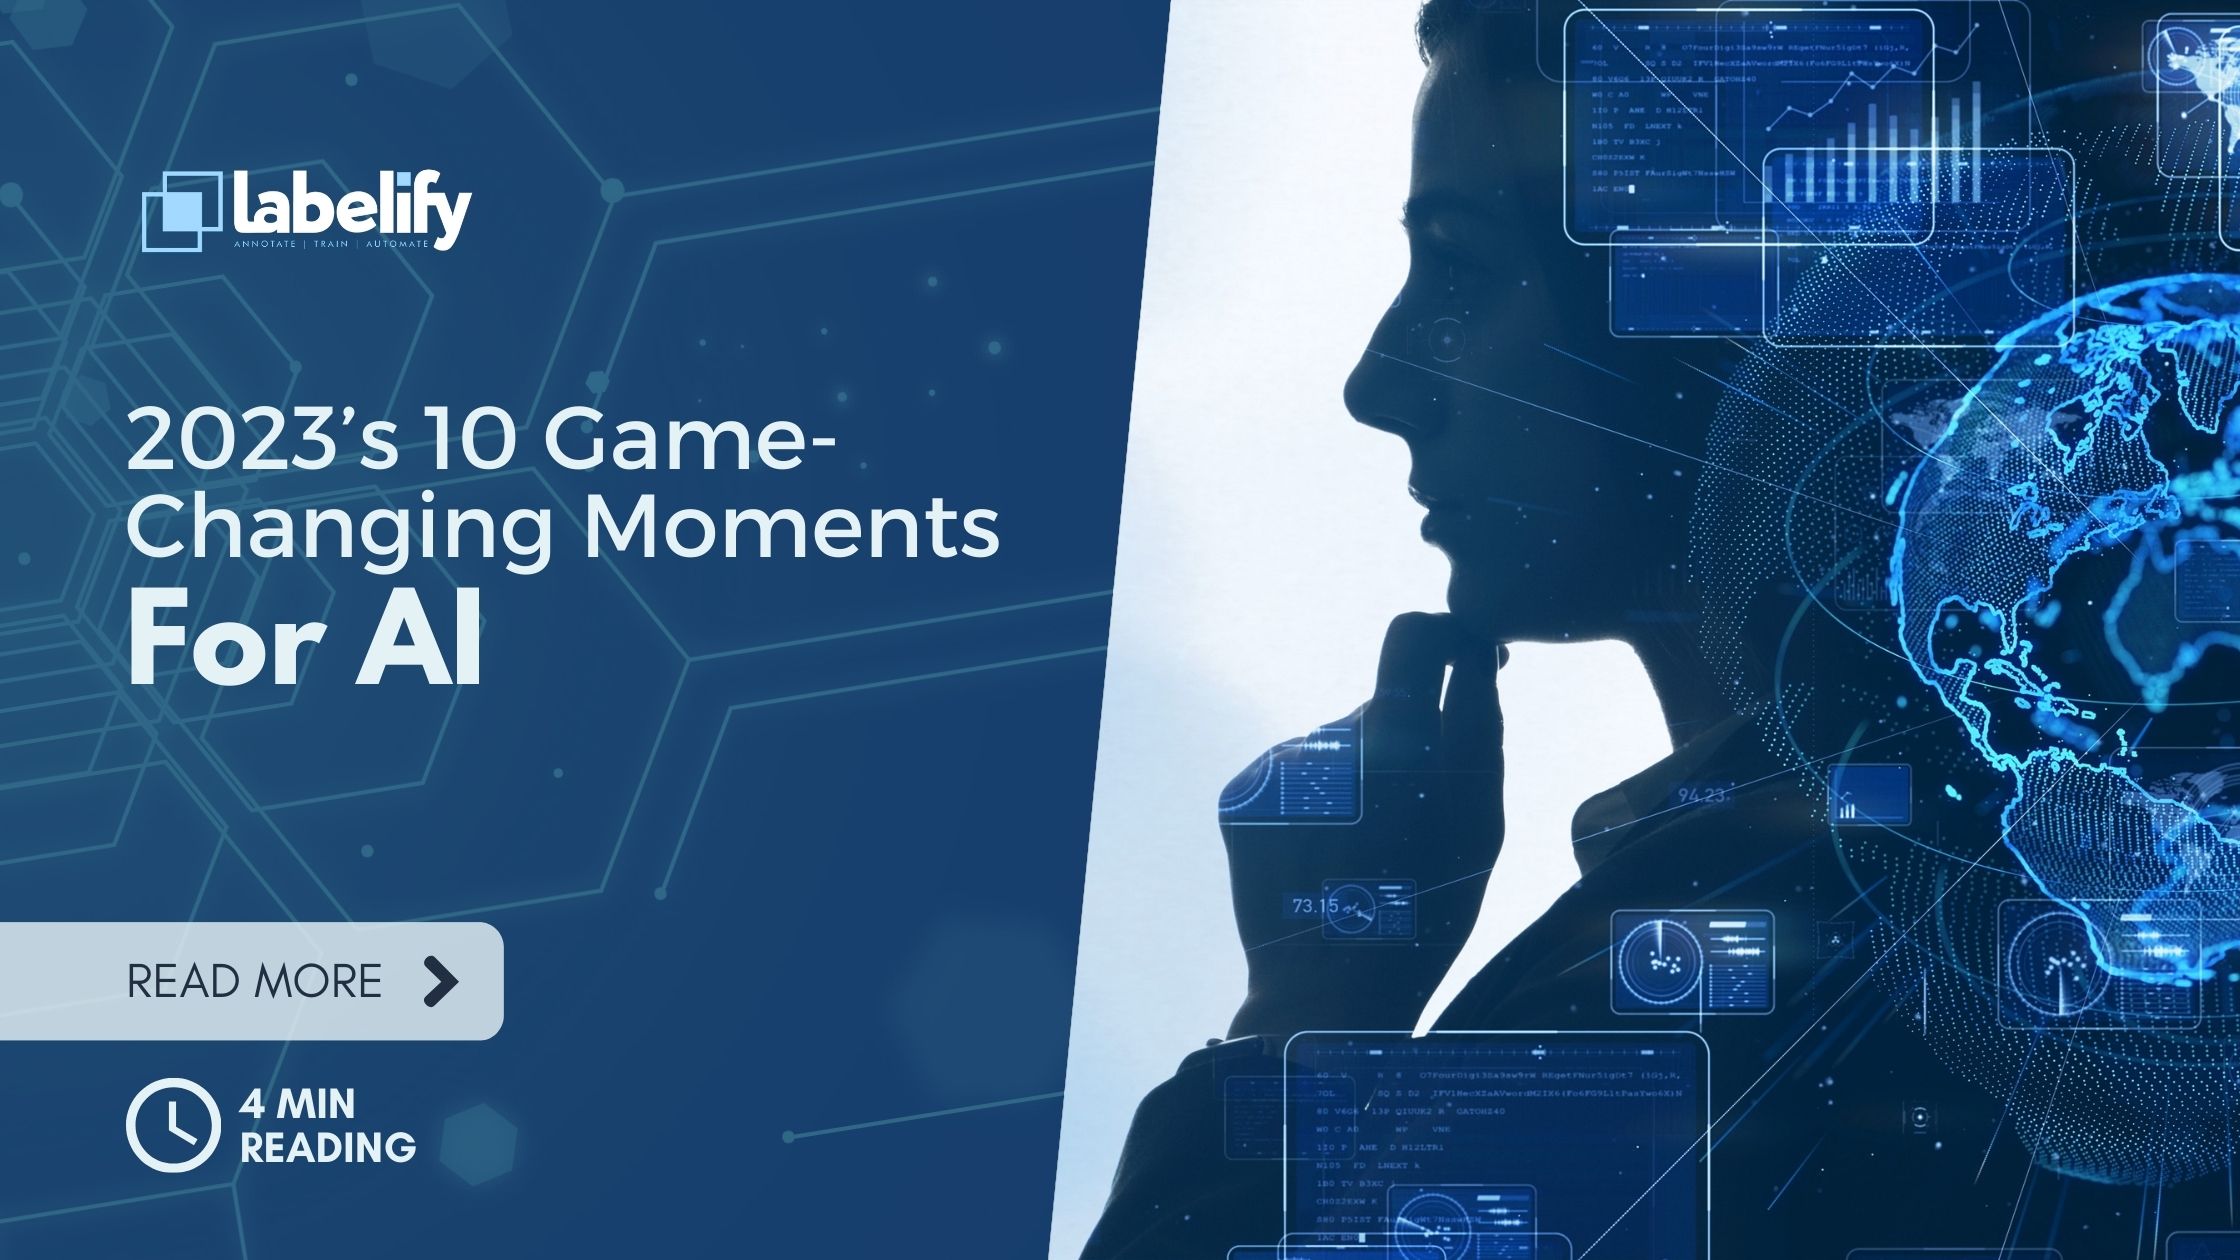 2023’s 10 Game-Changing Moments for AI